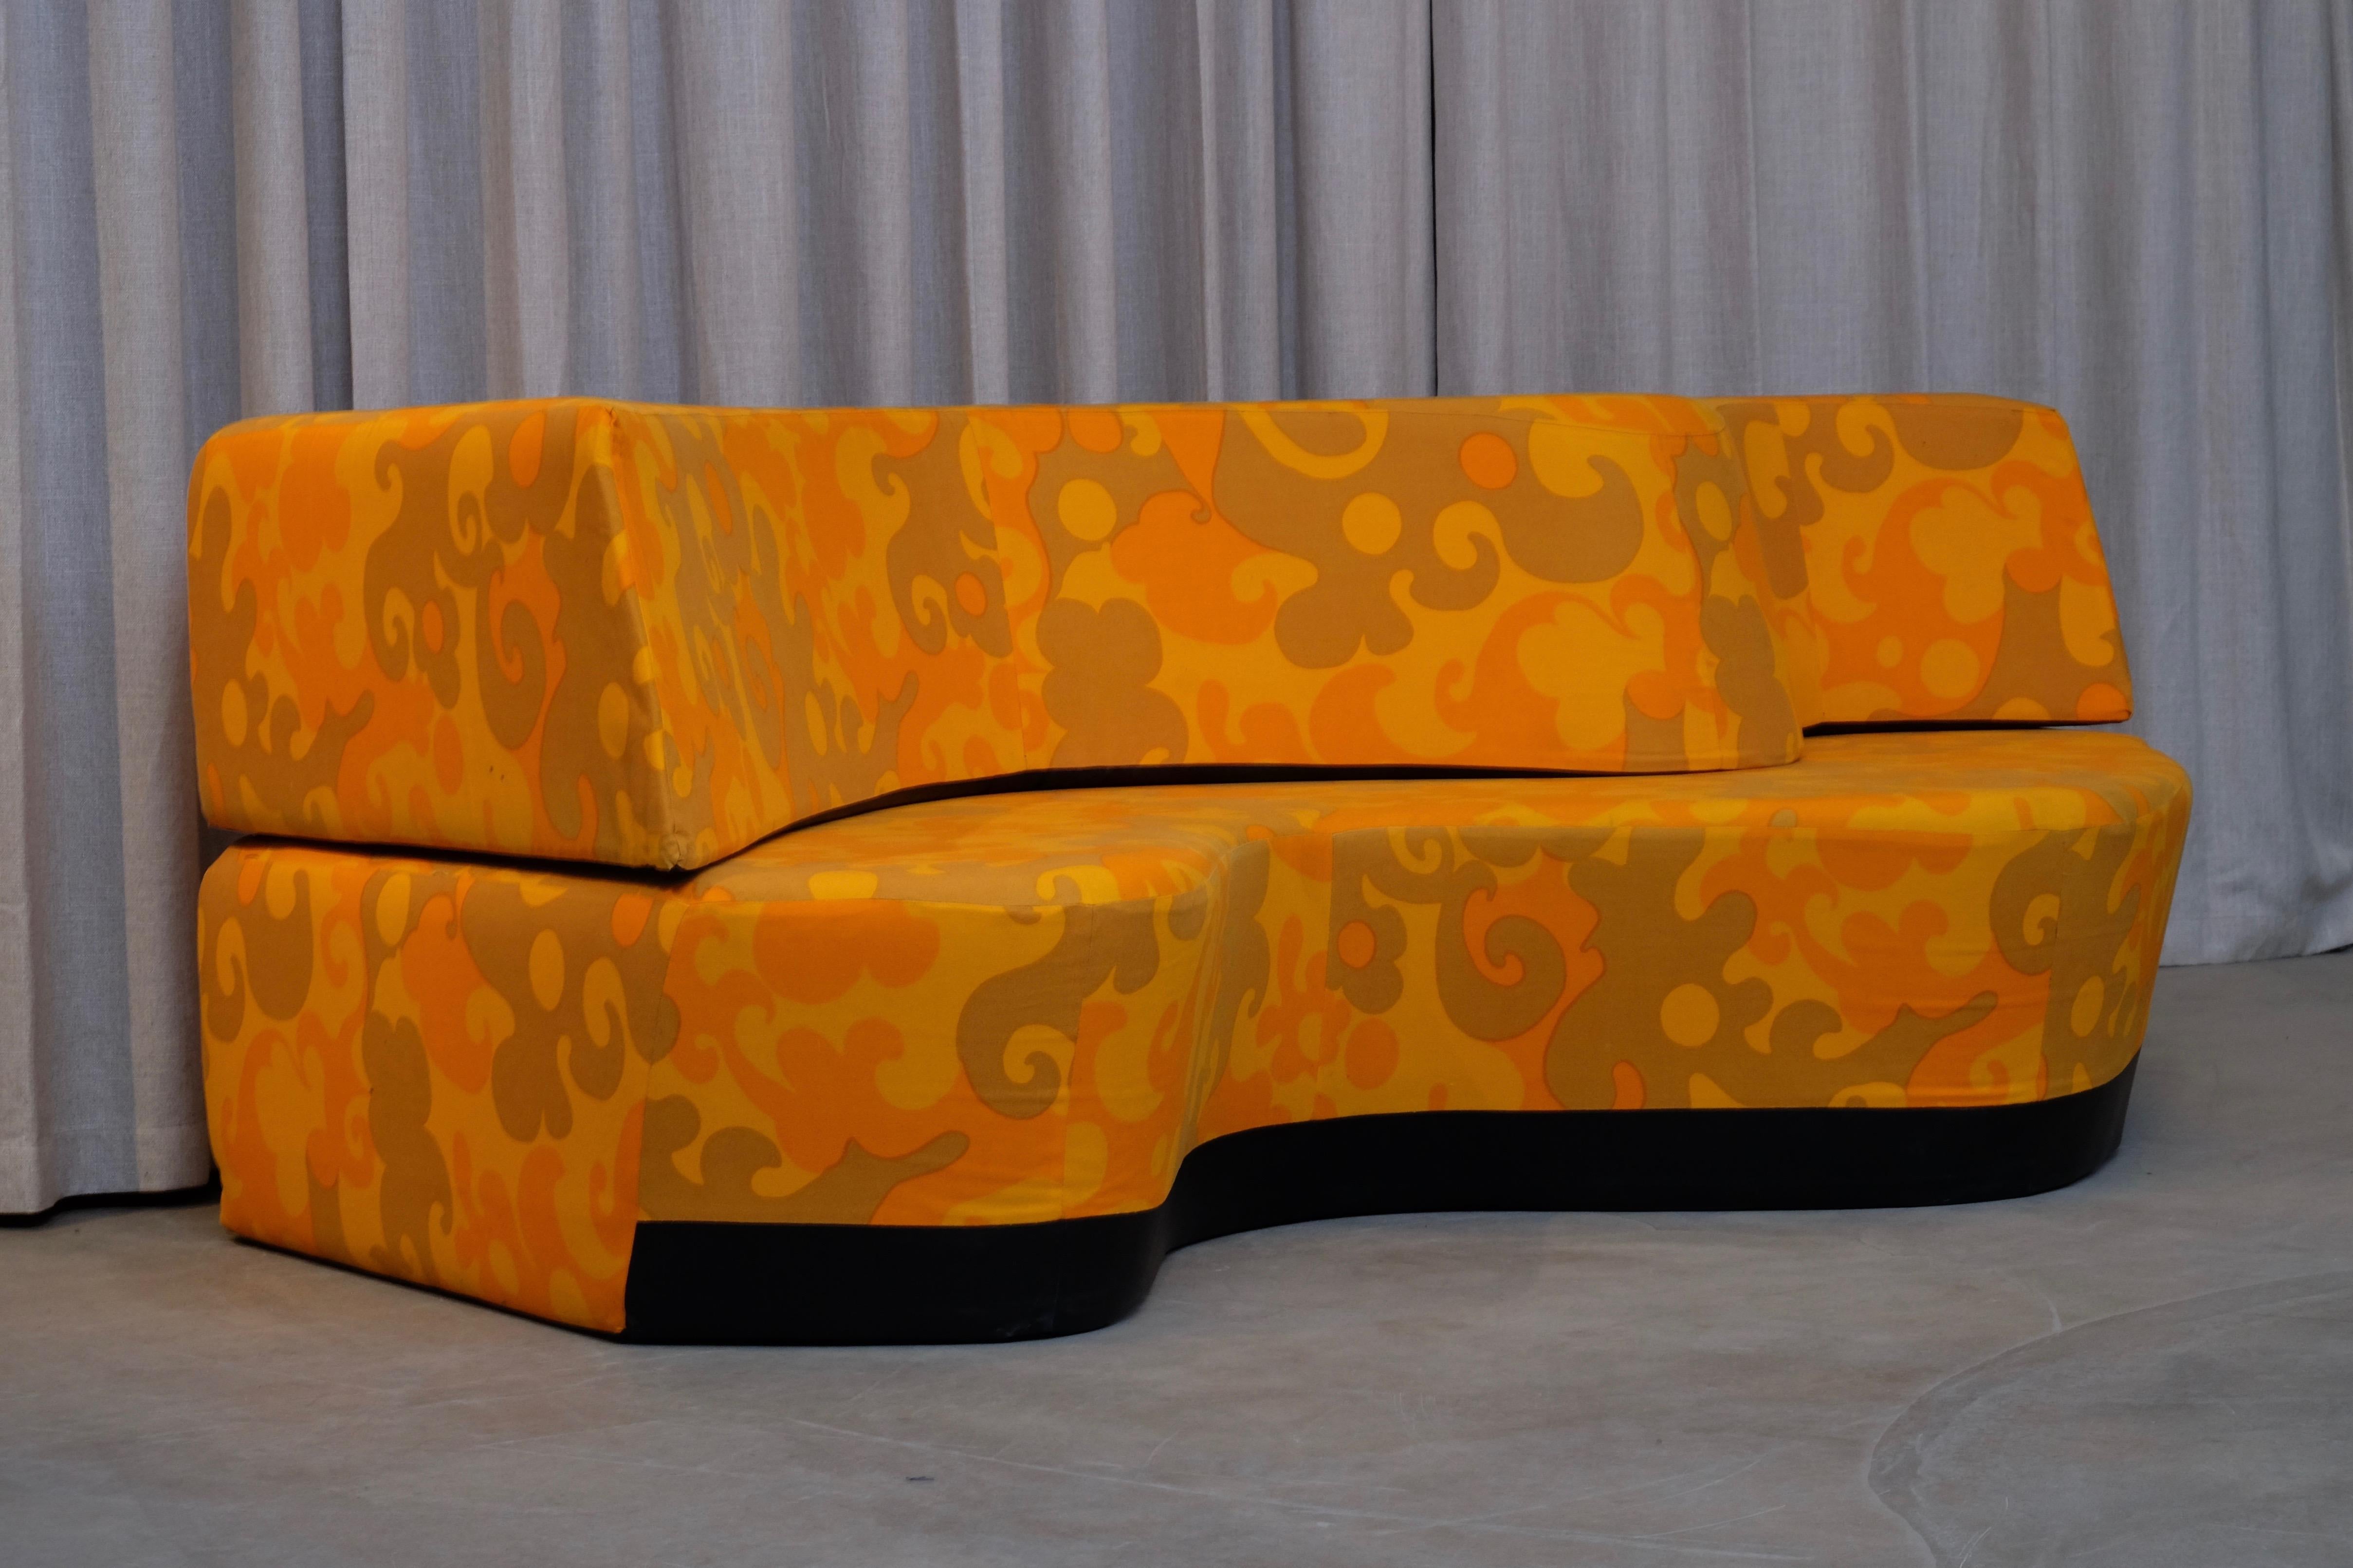 Designed in 1966 by the Florentine Radical group Archizoom, this was the first sofa without a conventional frame. It is composed of two waves made from a polyurethane block cut into two parts with an S-shaped incision, which can be interlocked and